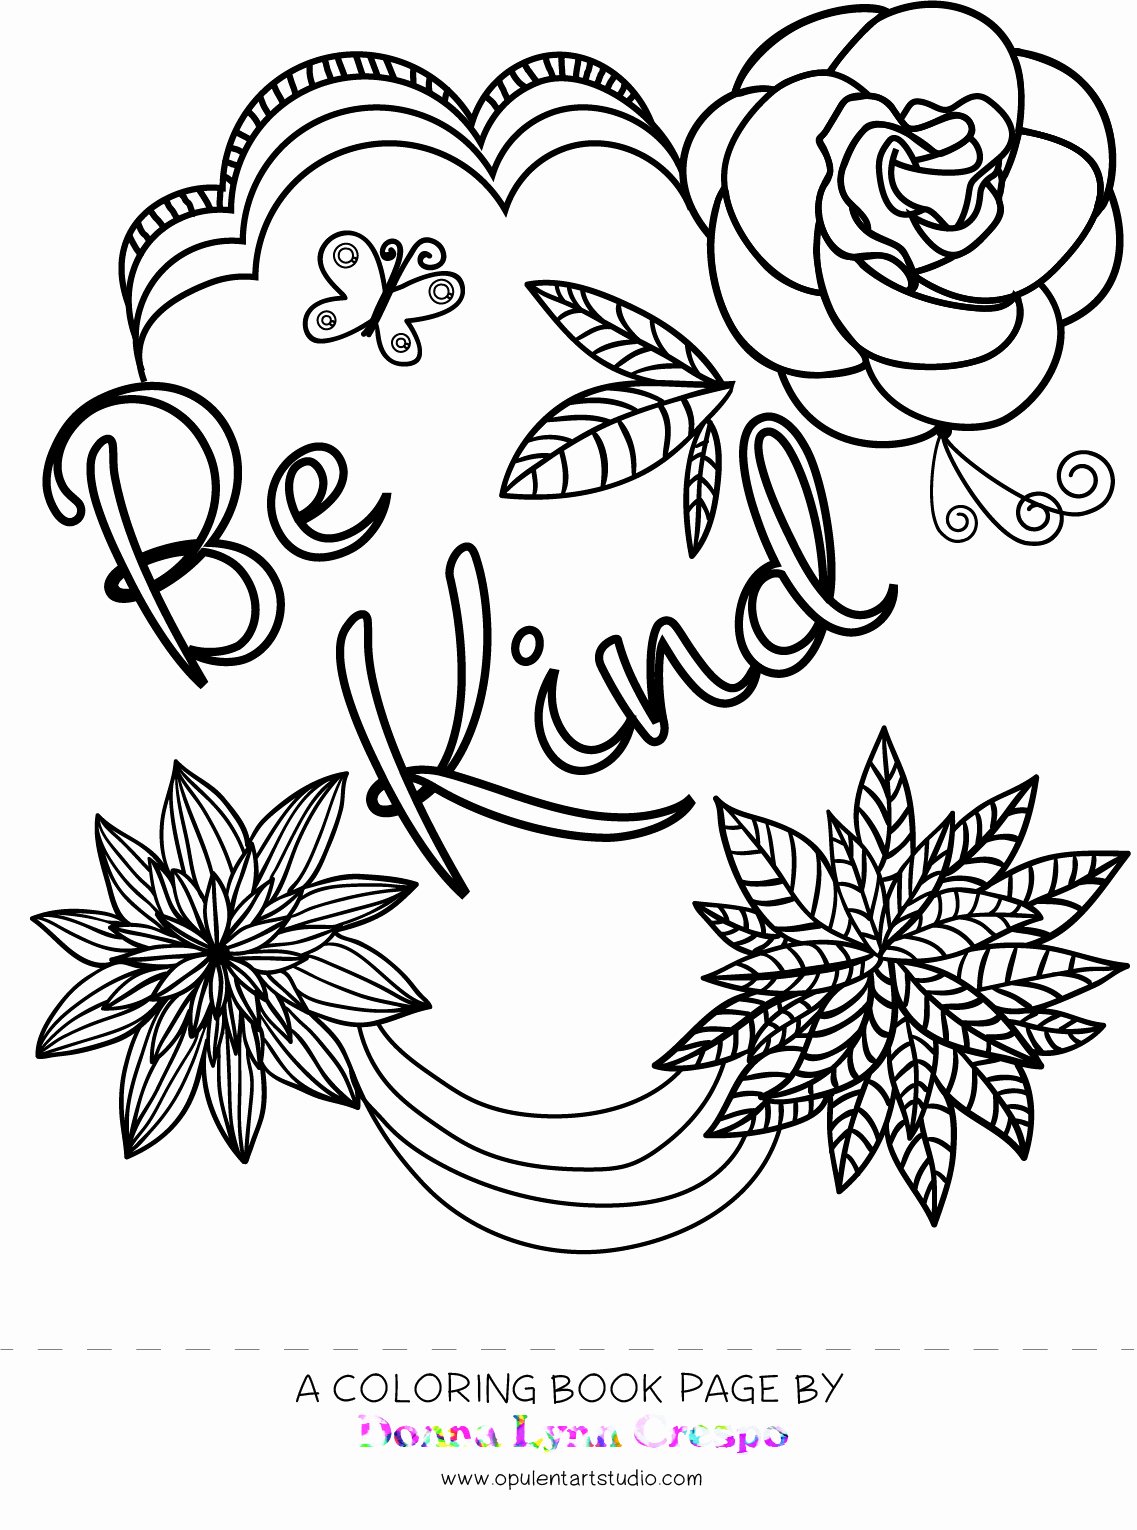 Be Kind Coloring Pages Lovely A Coloring Page for You ...